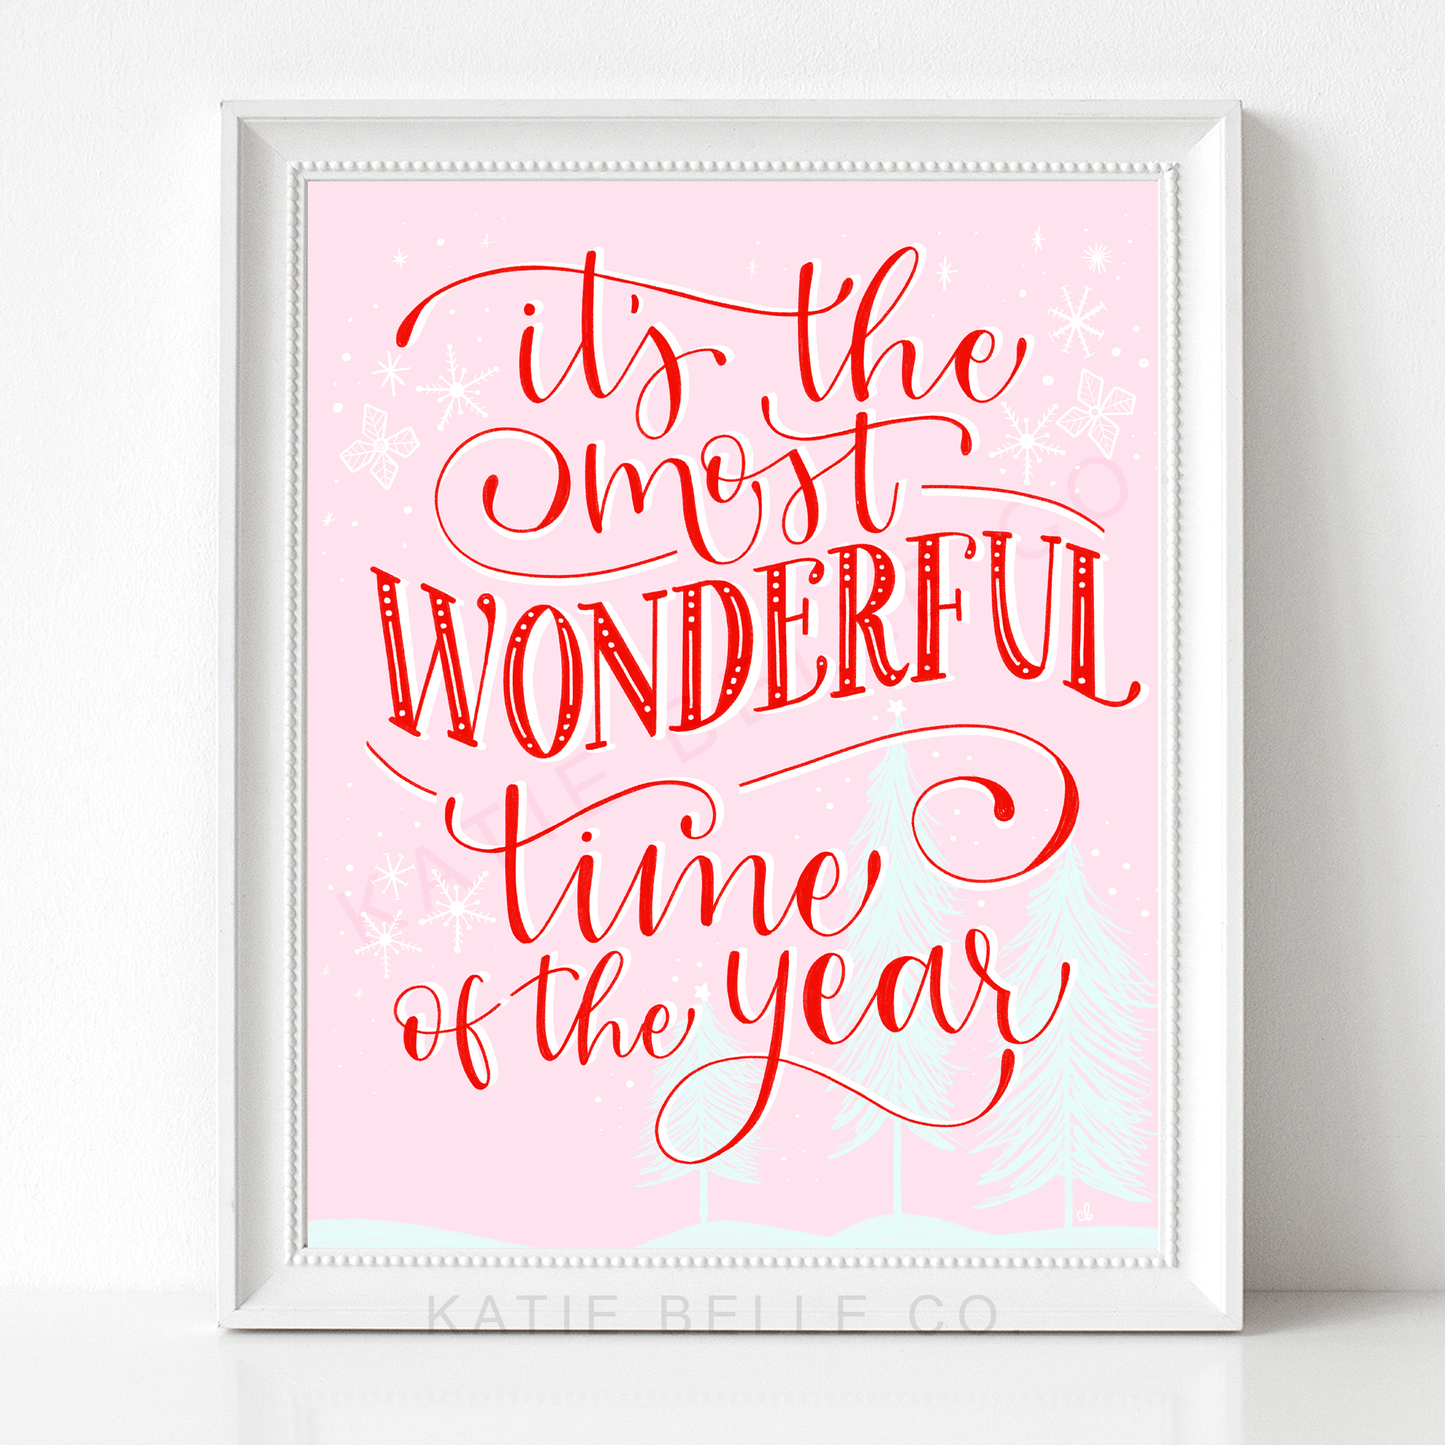 whimsical. pink. festive. christmas trees. snowflakes. red script font. christmas. holidays. holiday cheer. Our It's The Most Wonderful Time of the Year Art Print is a whimsical and festive addition to your holiday decor. Boasting charming pink hues and a delightful red script font, this piece will bring a touch of merry cheer to any room with its snowflakes, Christmas trees, and subtle holiday motifs. Unwrap some holiday magic this season with a classic touch. Katie belle co.